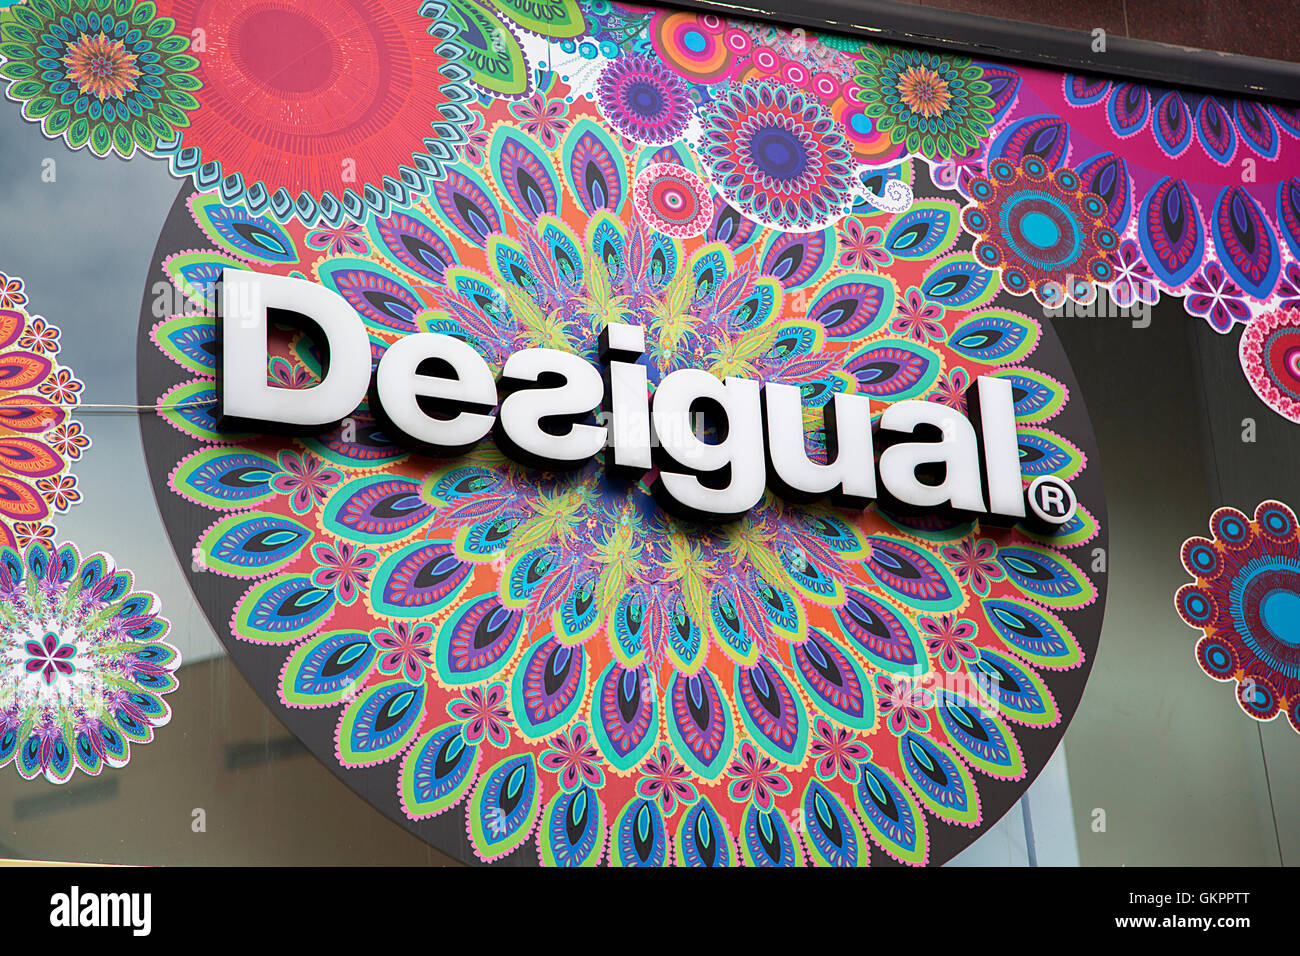 LAS PALMAS, SPAIN - MAY 4, 2016: Detail of the Desigual shop in Las Palmas, Spain. Desigual is a casual clothing brand founded a Stock Photo